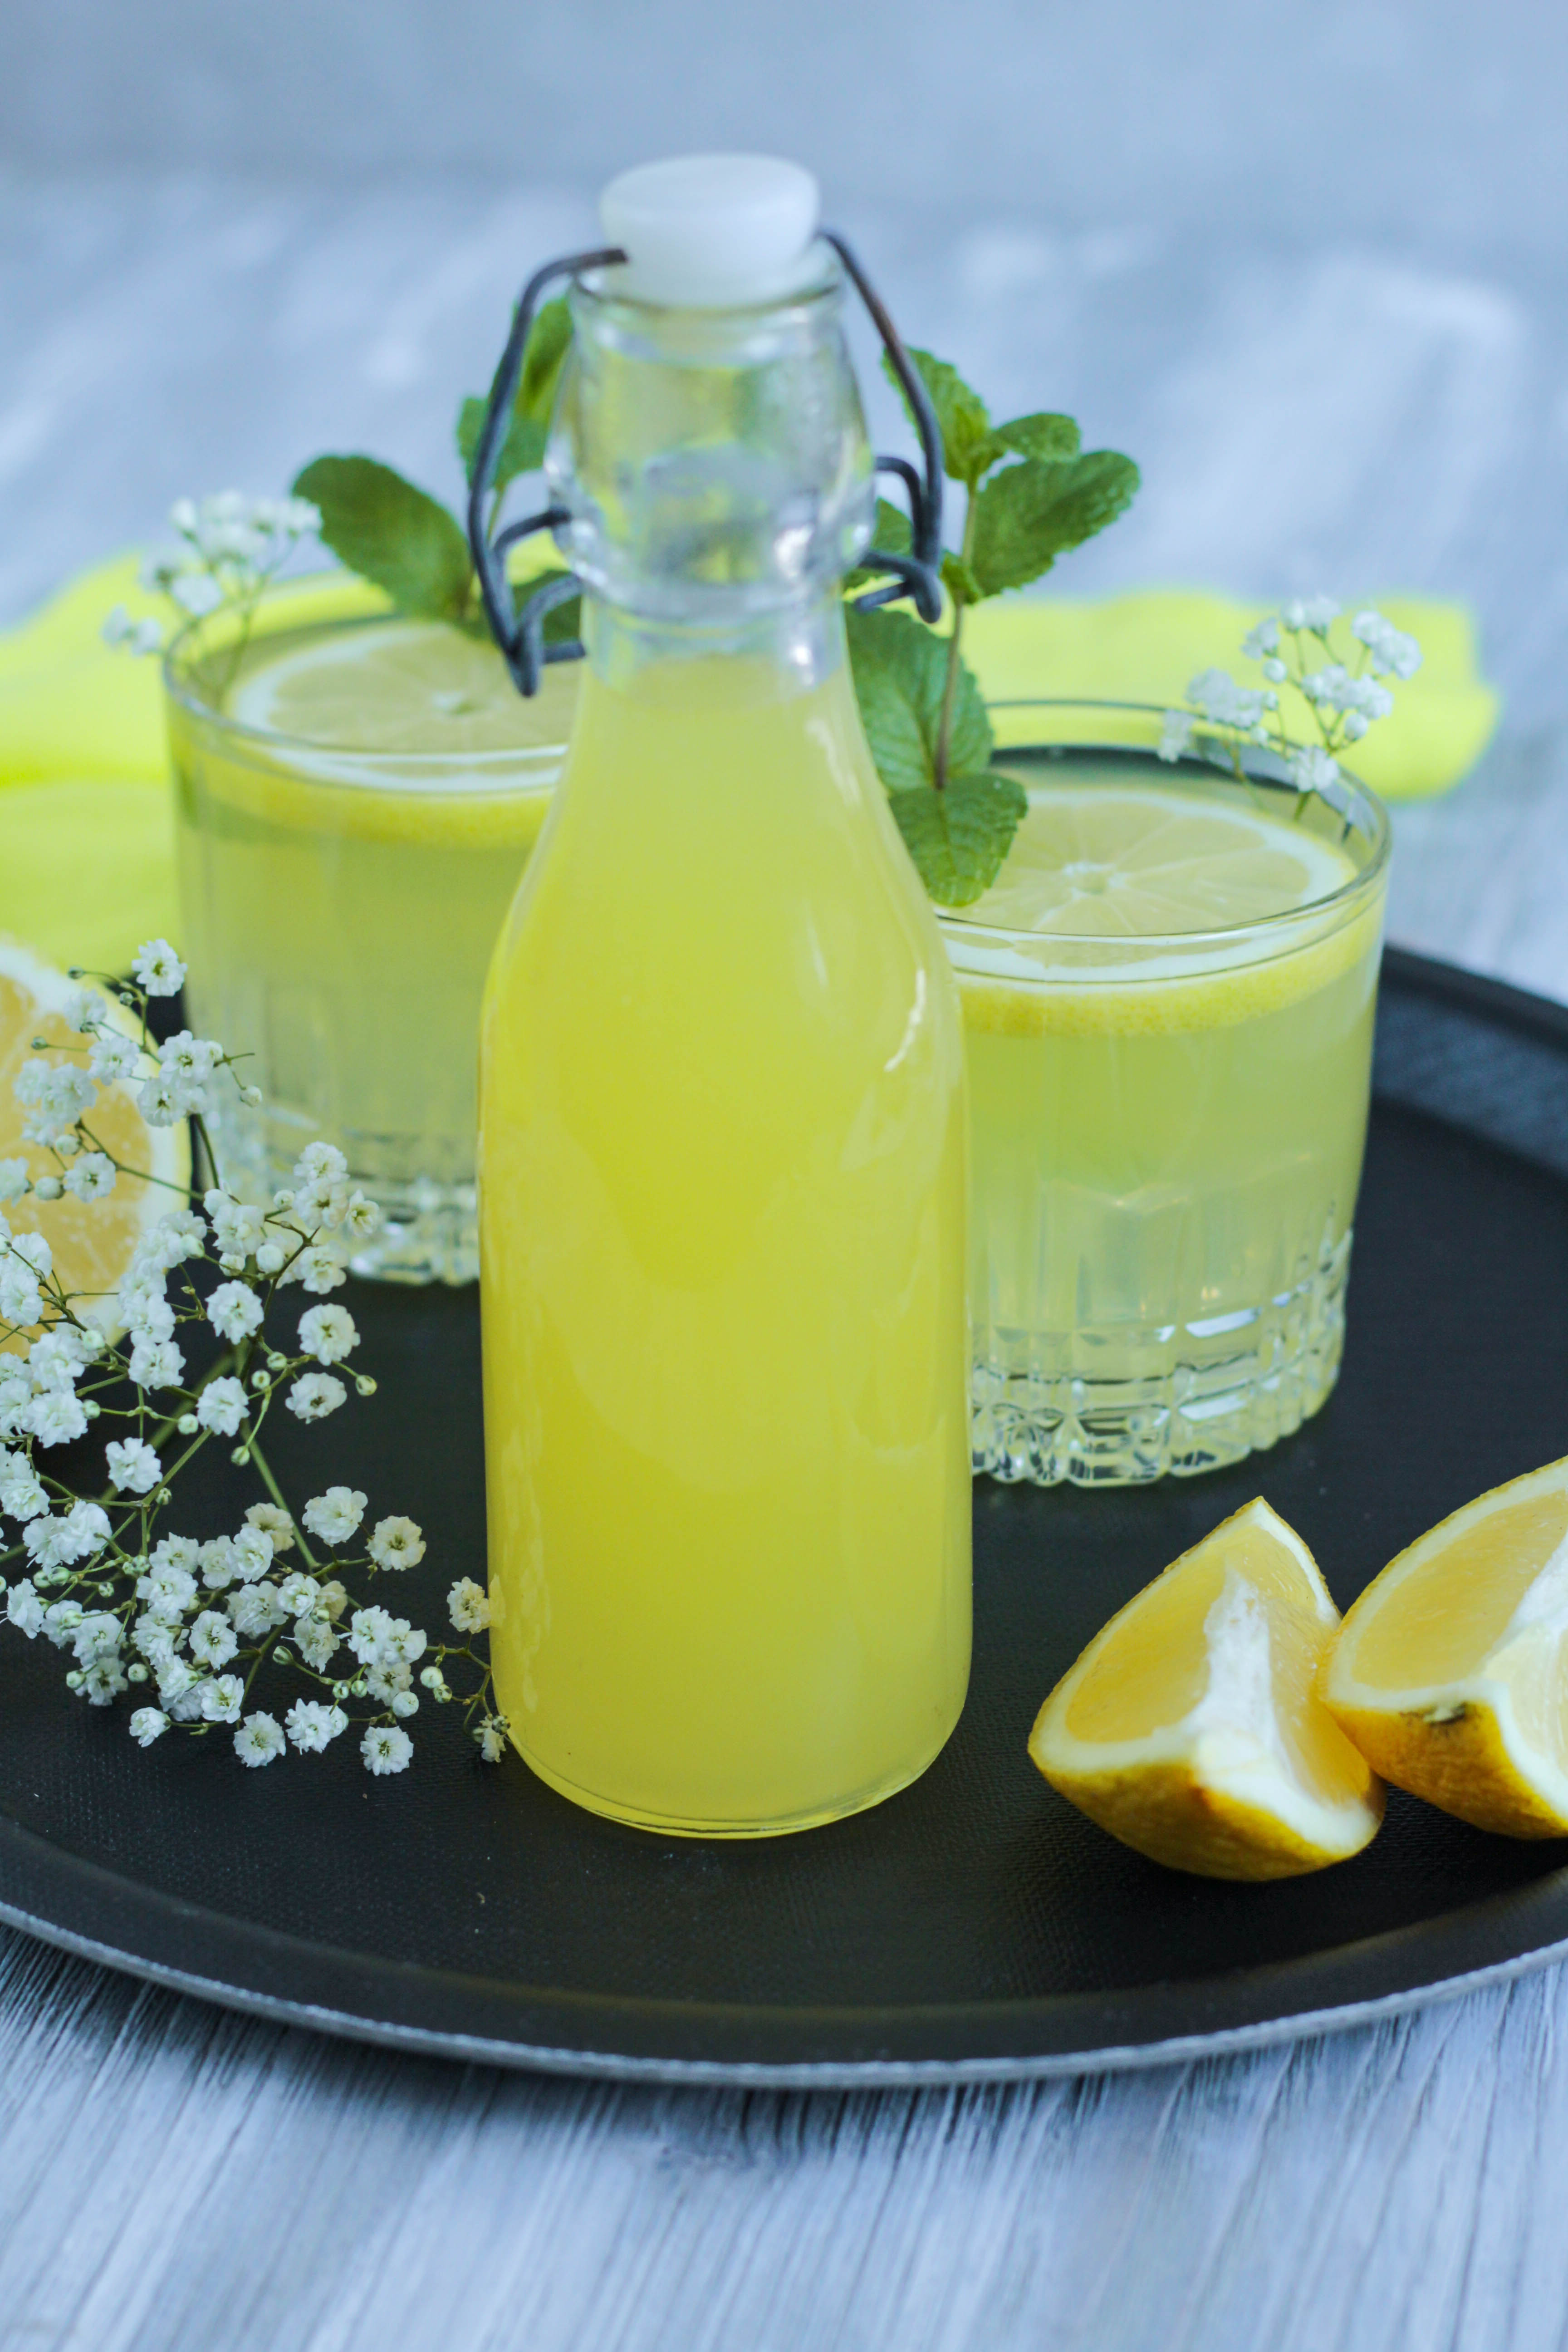 https://madyna.be/storage/activity_photos/631c8b1856bfd/Limoncello-_2521.jpg